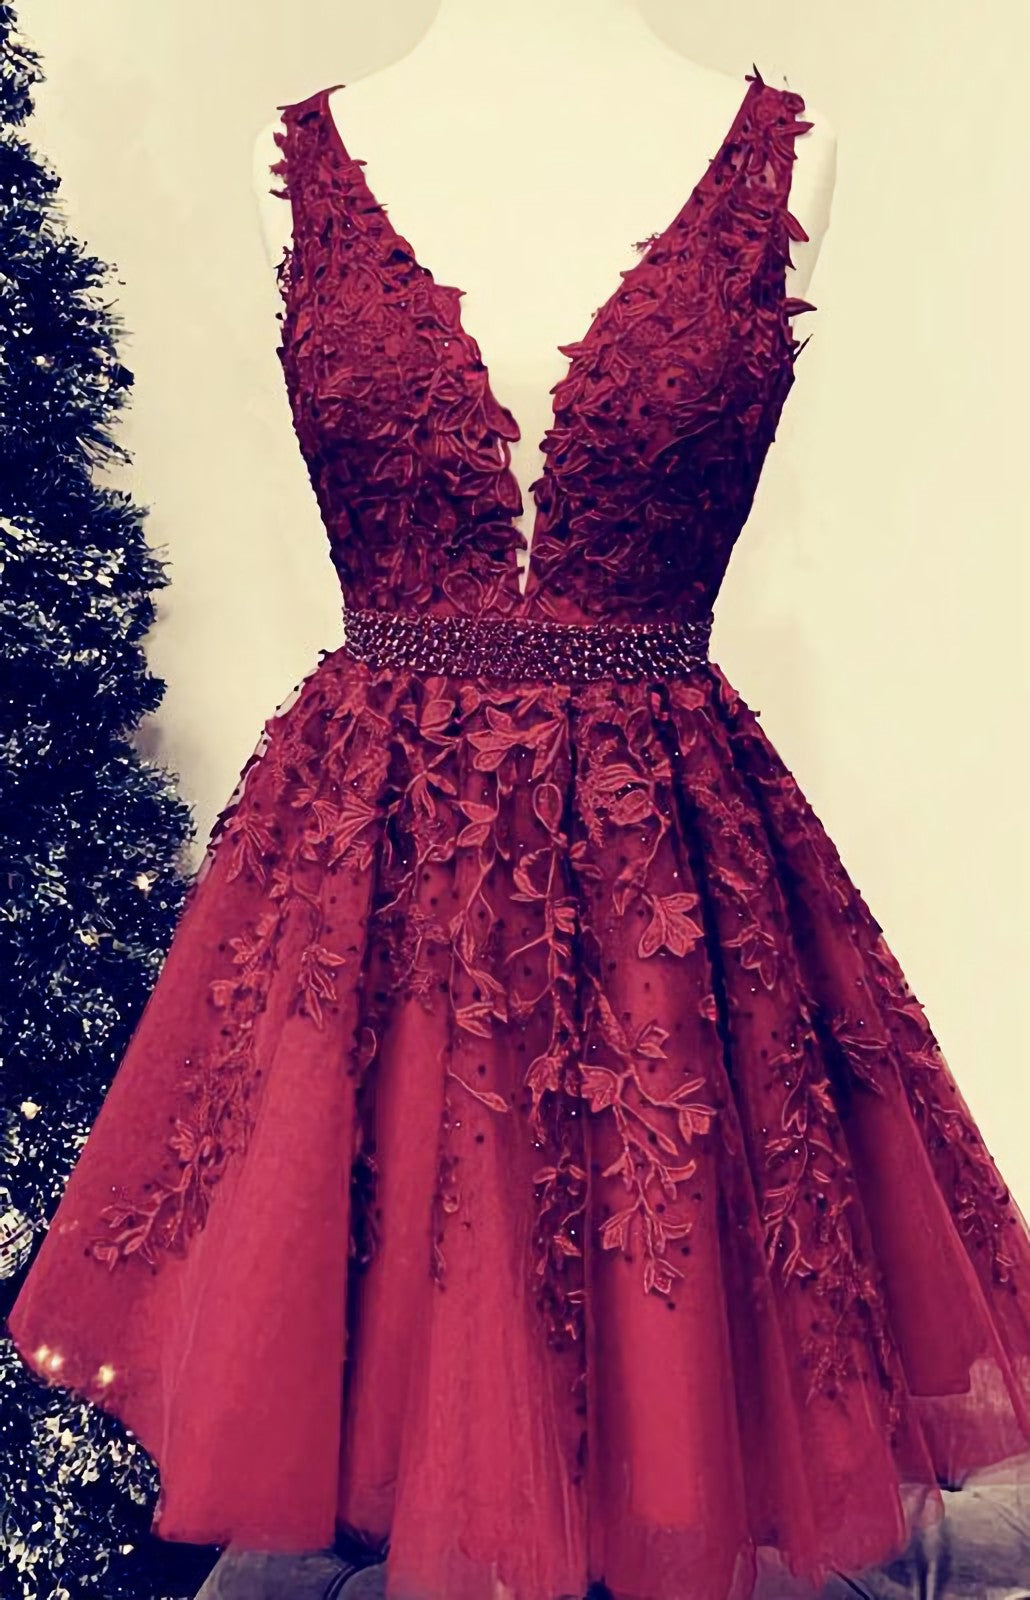 Tulle Corset Homecoming Dresses, Burgundy Corset Homecoming Dresses outfit, Prom Dresses Under 57